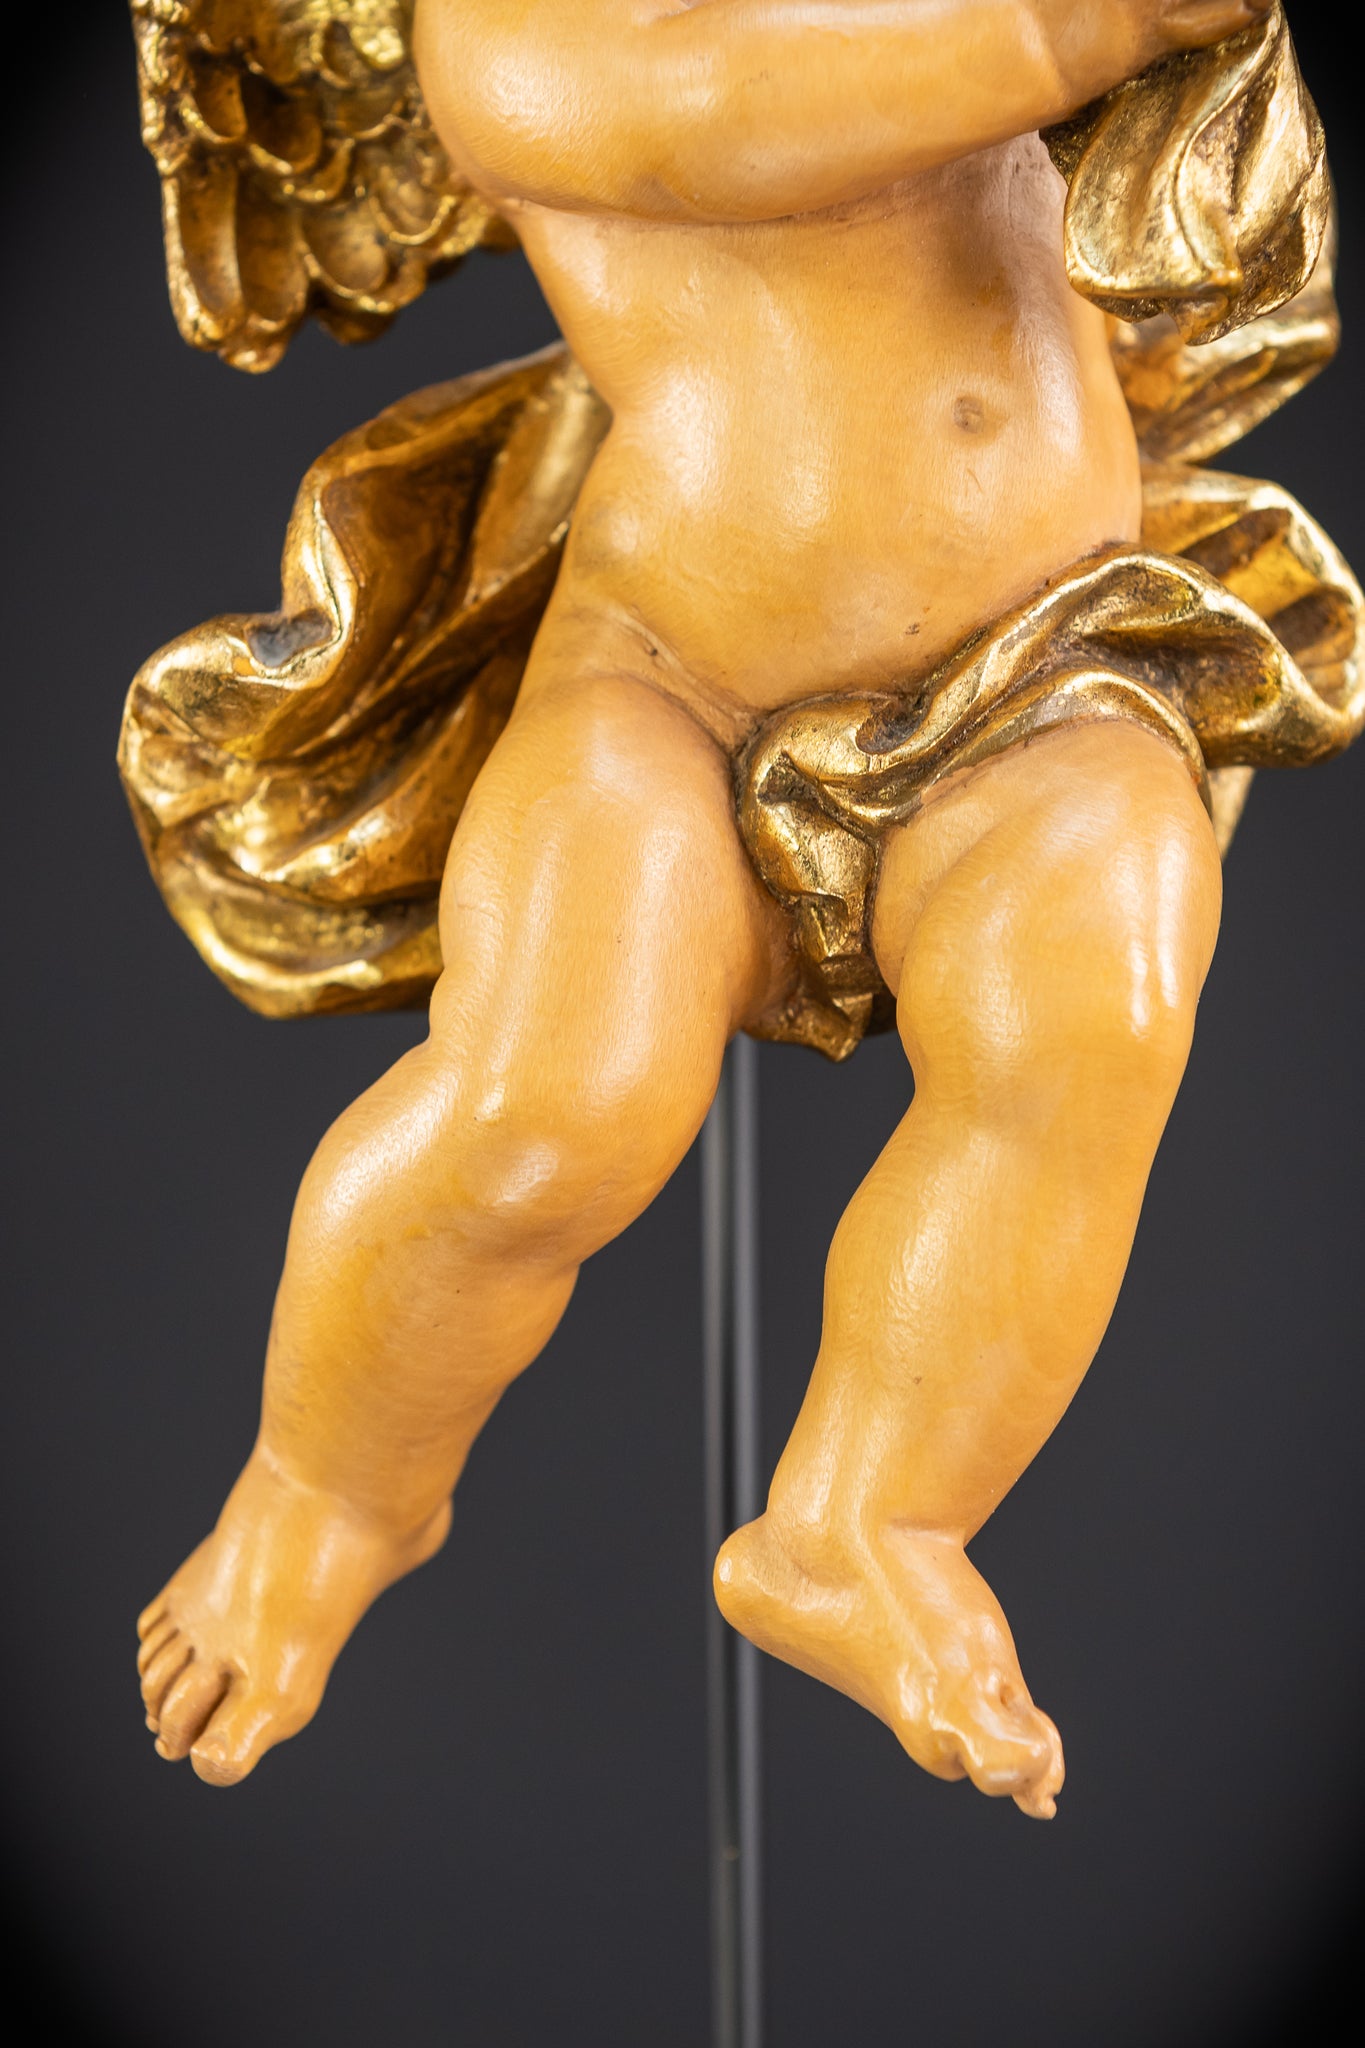 Angel Italian Wooden Sculpture | Mid 1900s Vintage | 10.4 inches (26.5 cm)